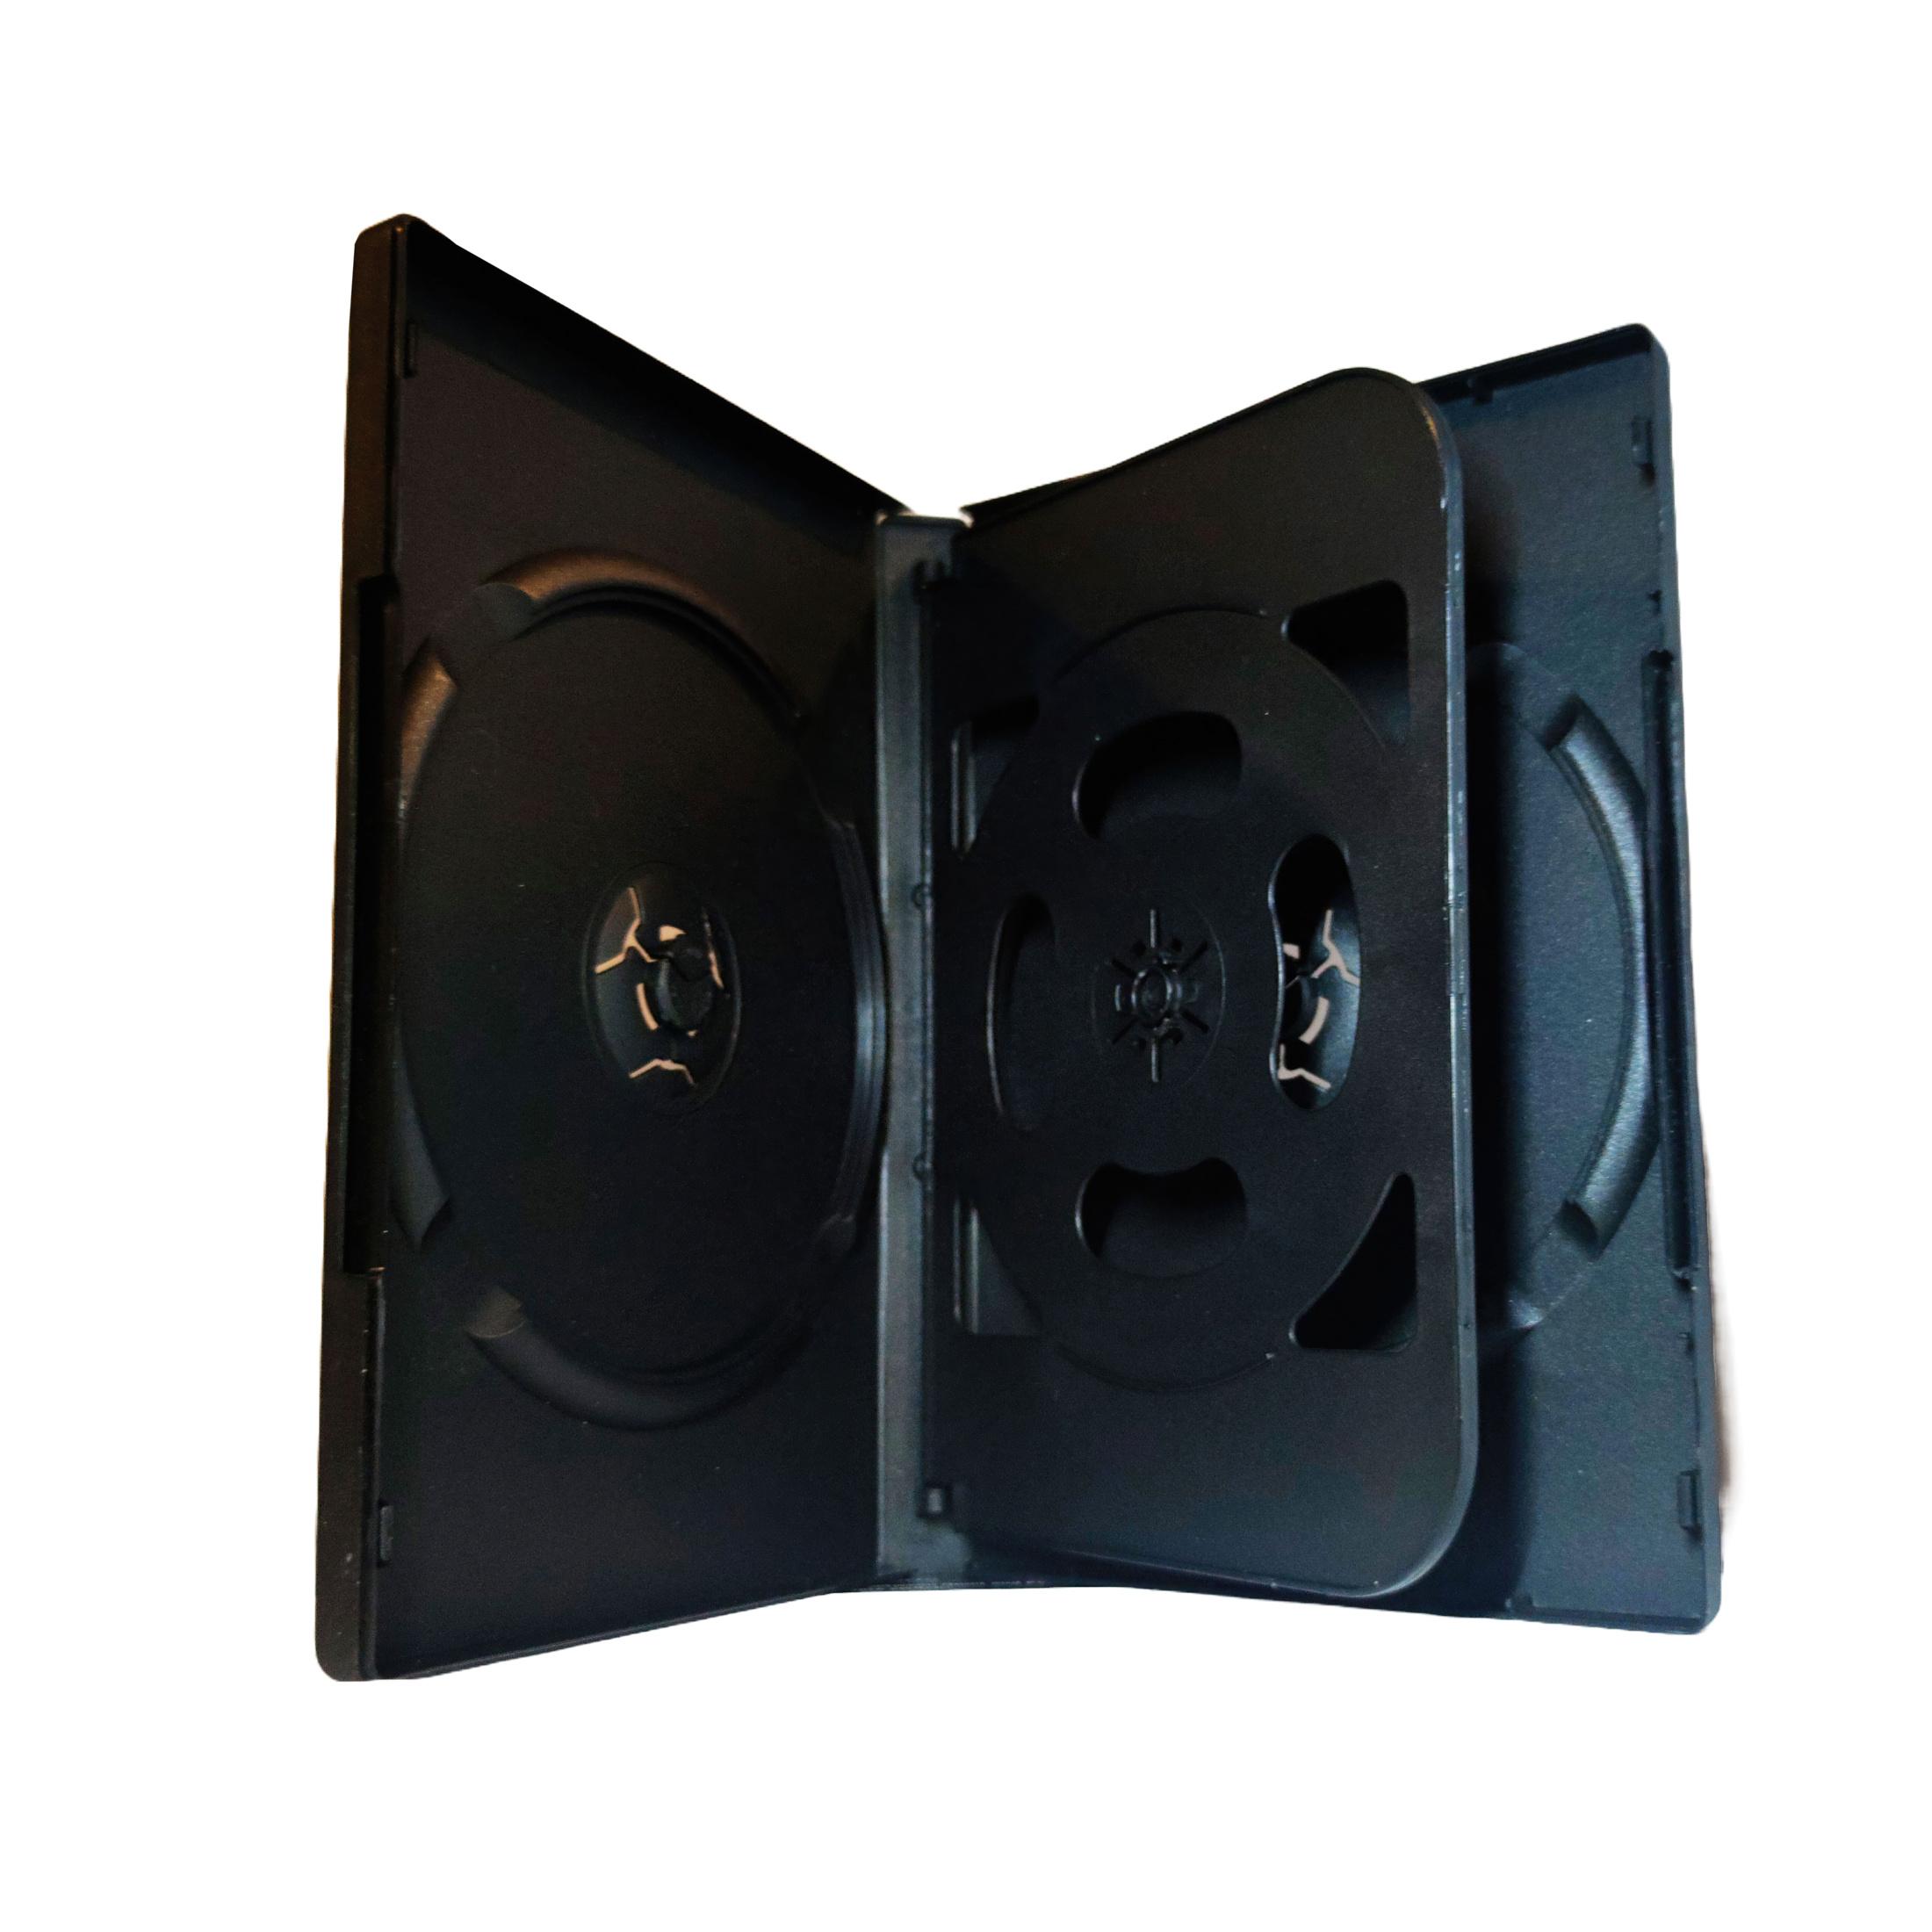 COVER IT Box: 4 DVD 19mm Black - Pack of 5